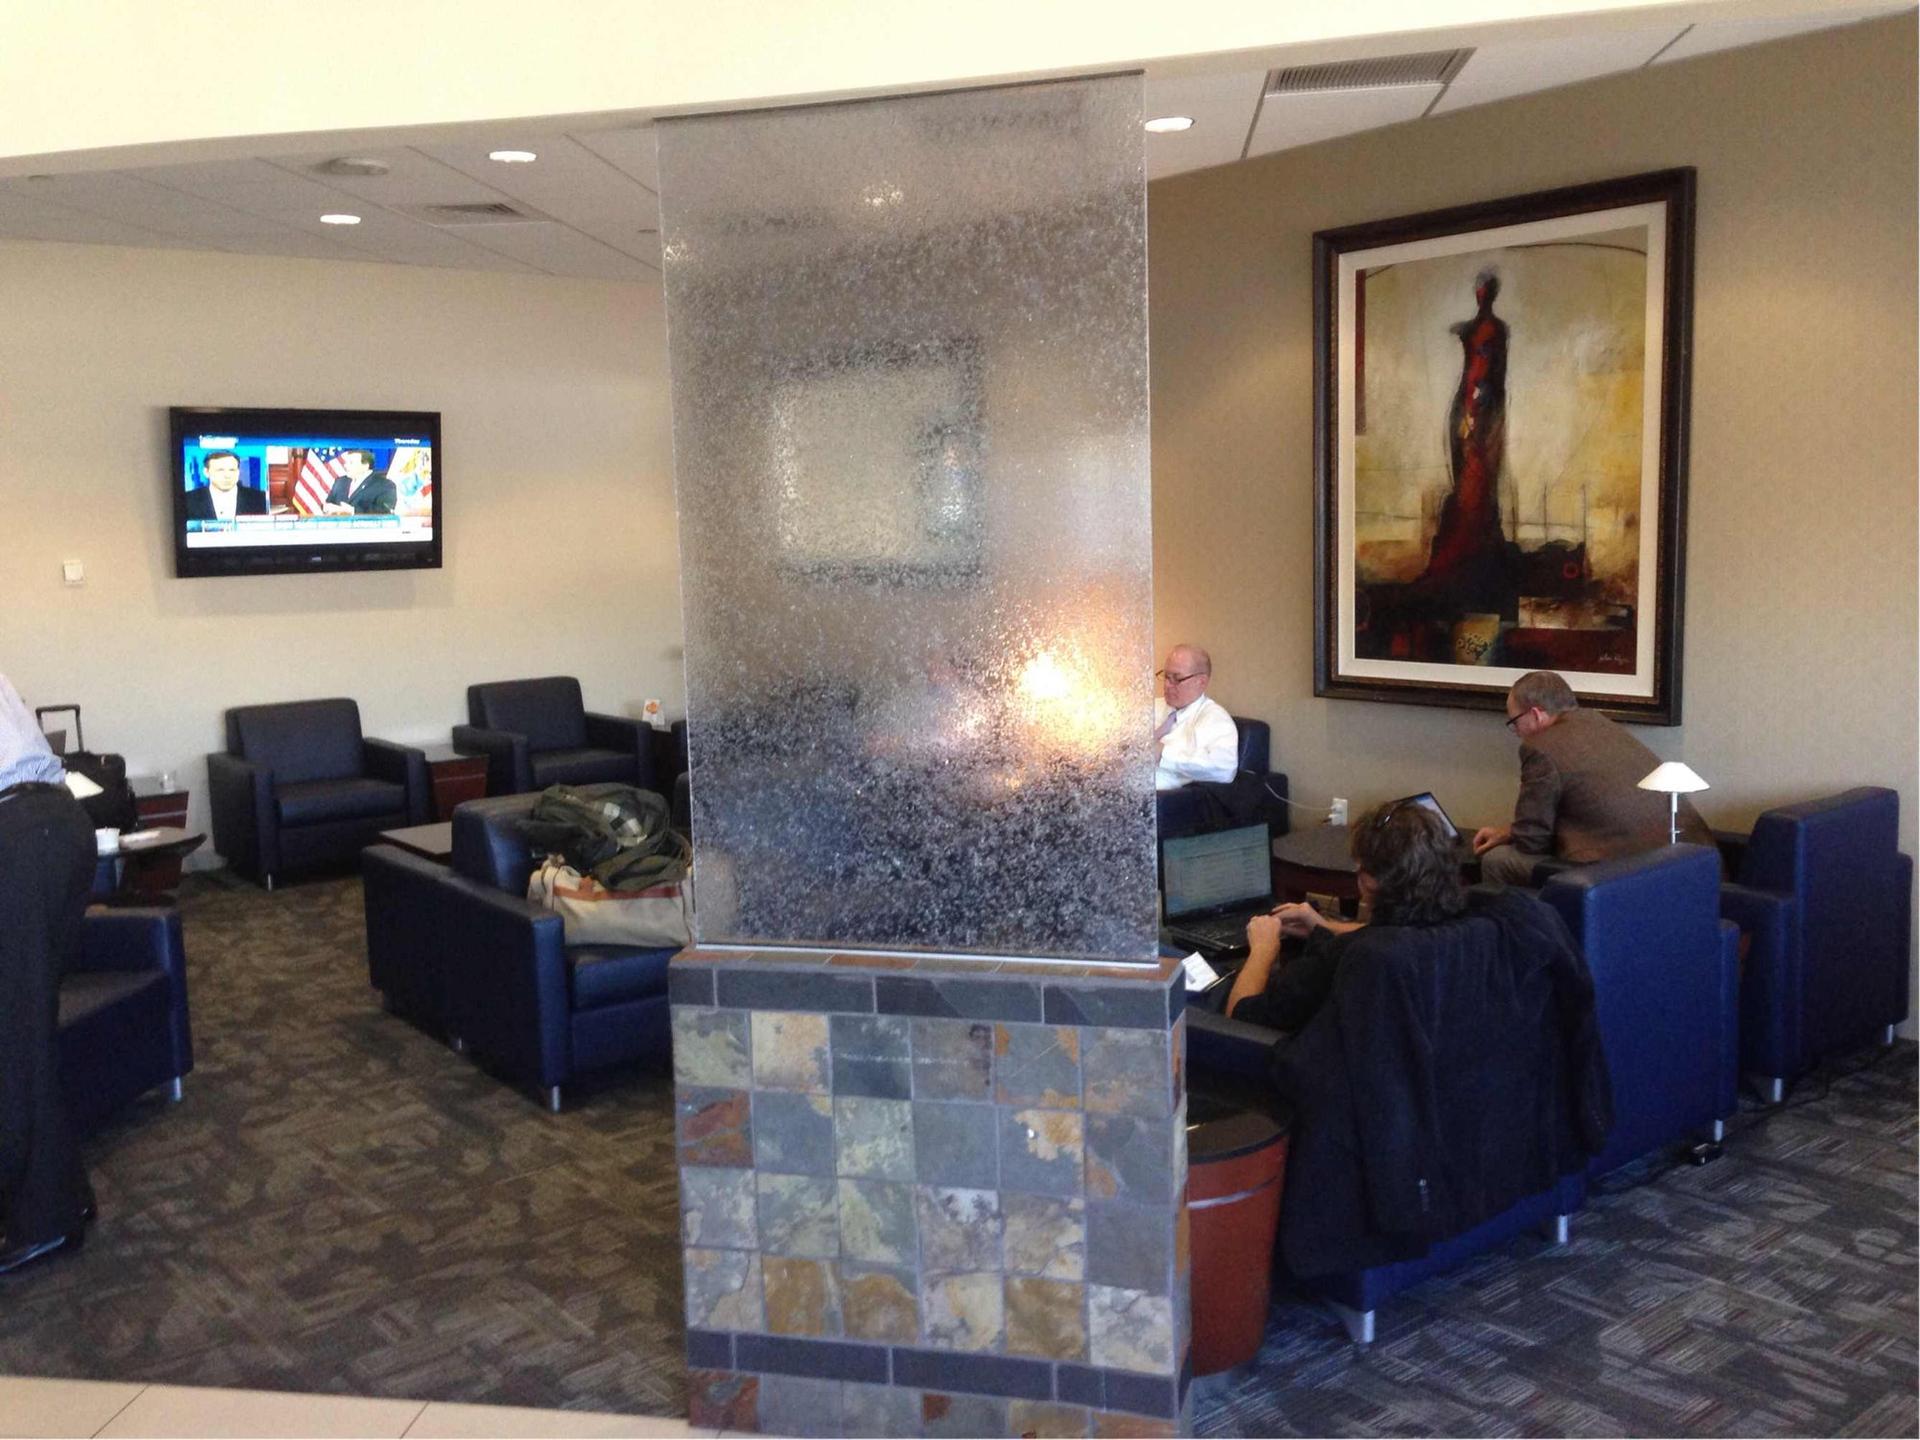 American Airlines Admirals Club (Gates A19-A21) image 7 of 16